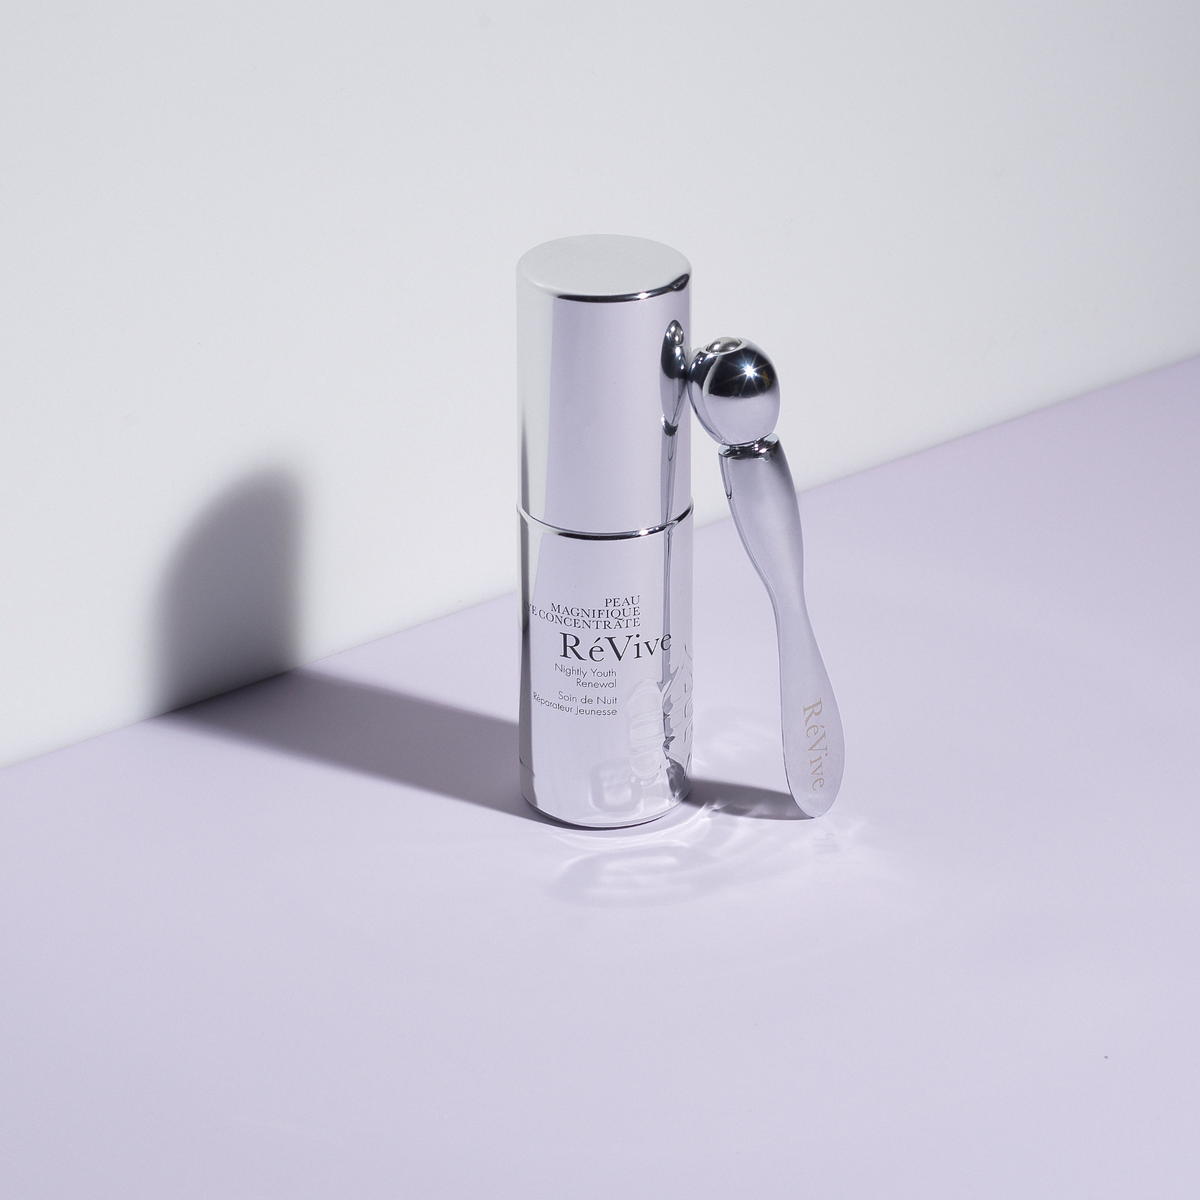 Peau Magnifique Eye Concentrate, Nightly Youth Renewal